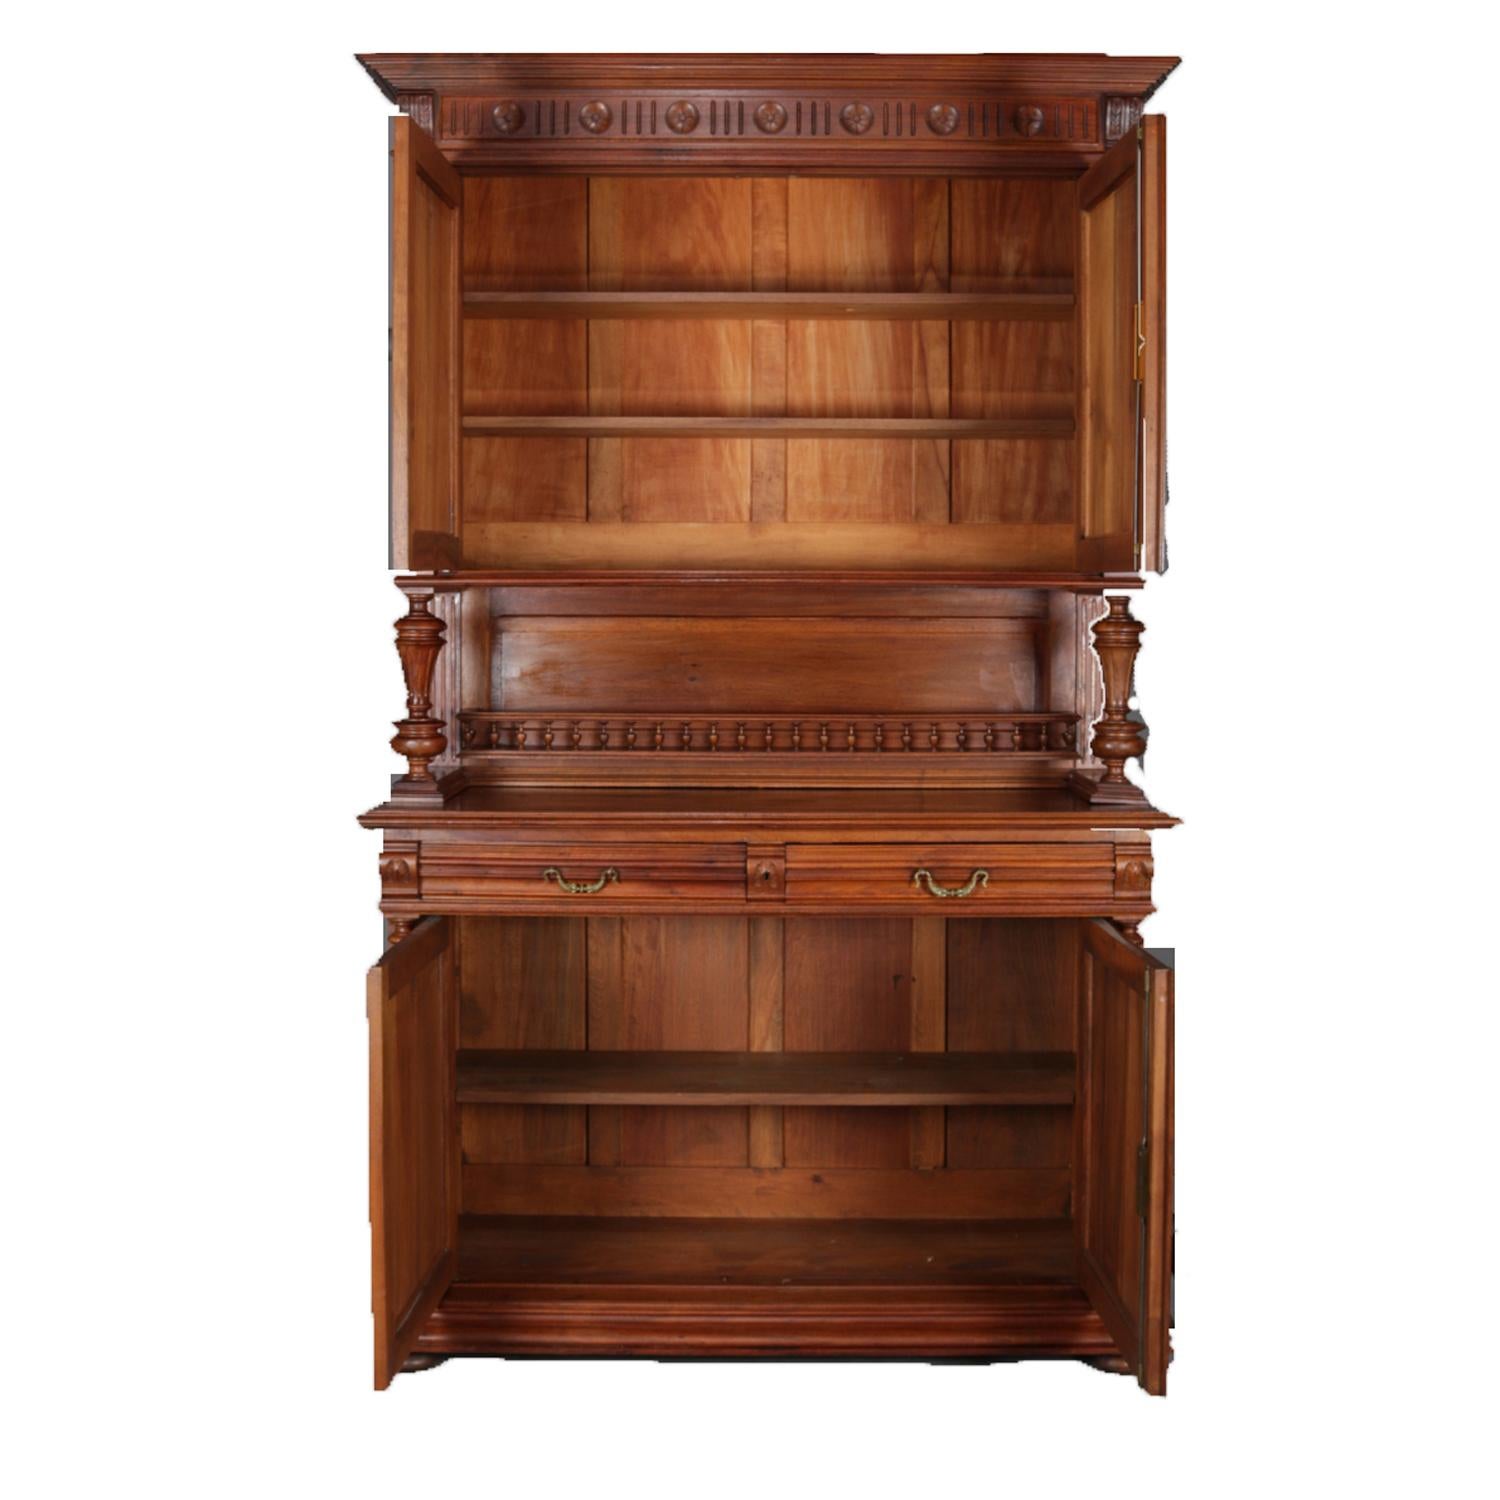 19th Century Antique English Carved Oak Grape and Leaf Court Cupboard, circa 1890